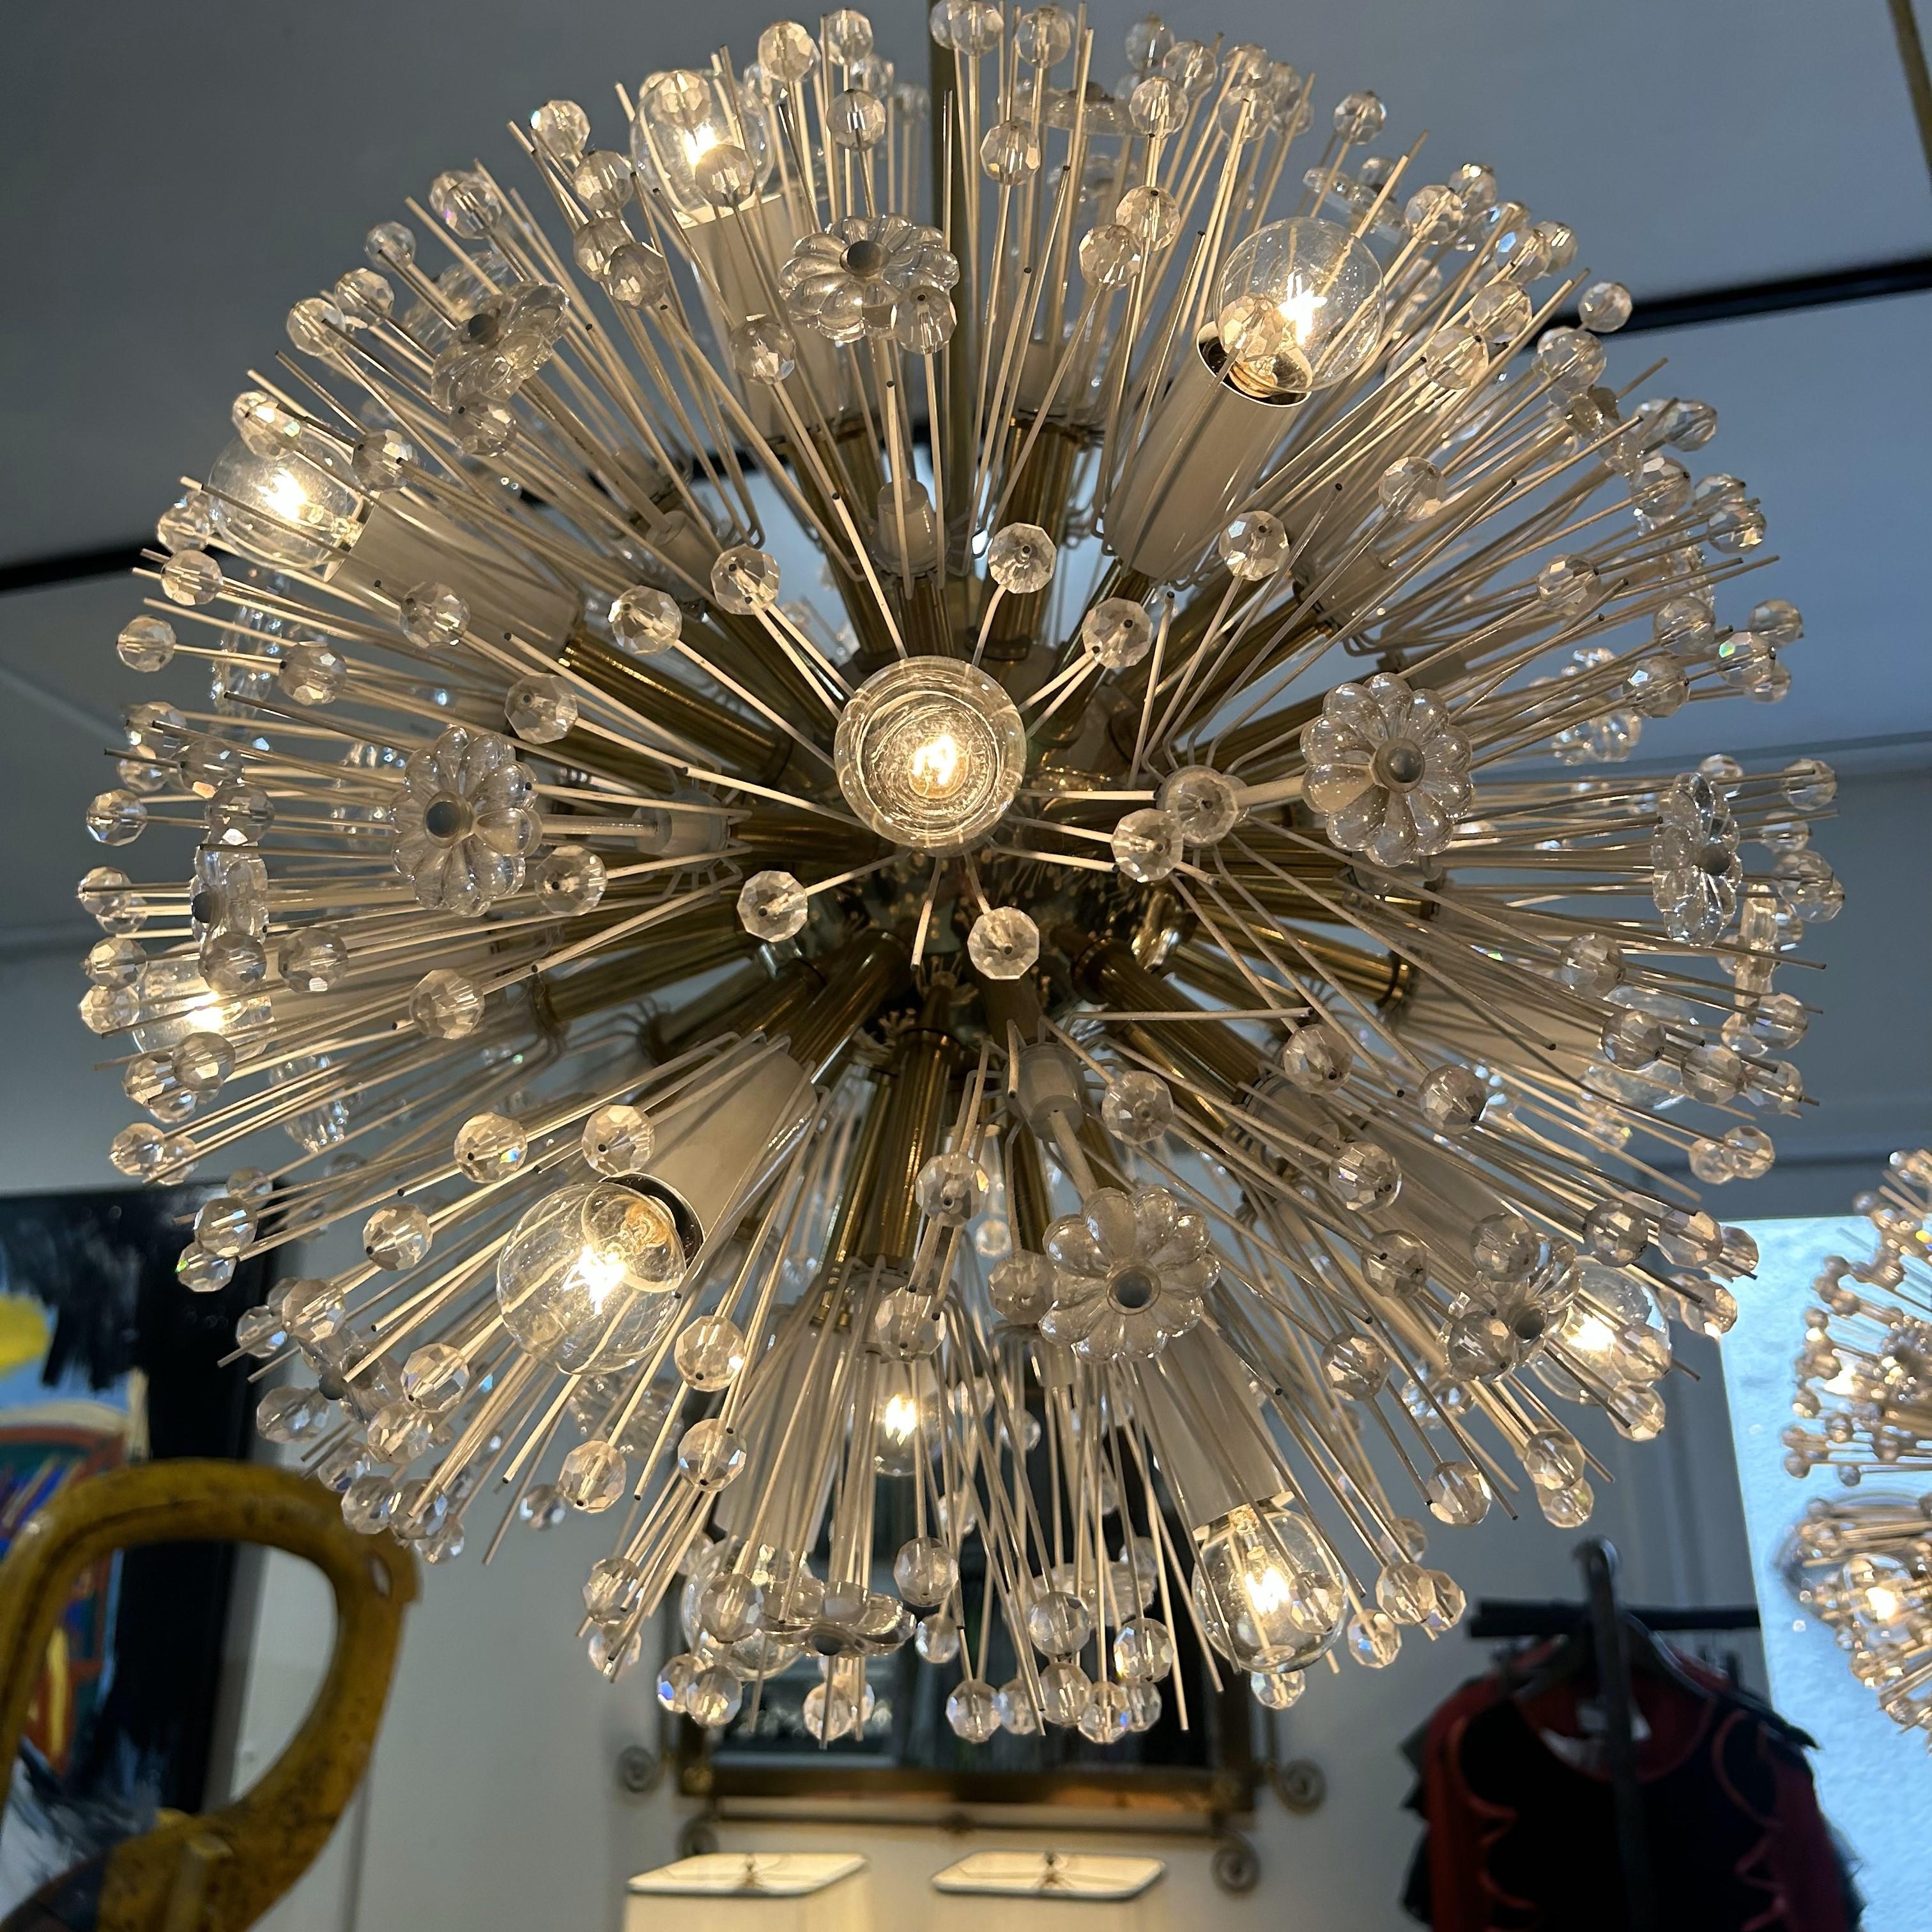 Snowflake Chandelier designed by Emil Stejnar in 1960s in Vienna Austria

This is a Re-Edition Made in the early 2000s

Wired Through Brass Tube To Base